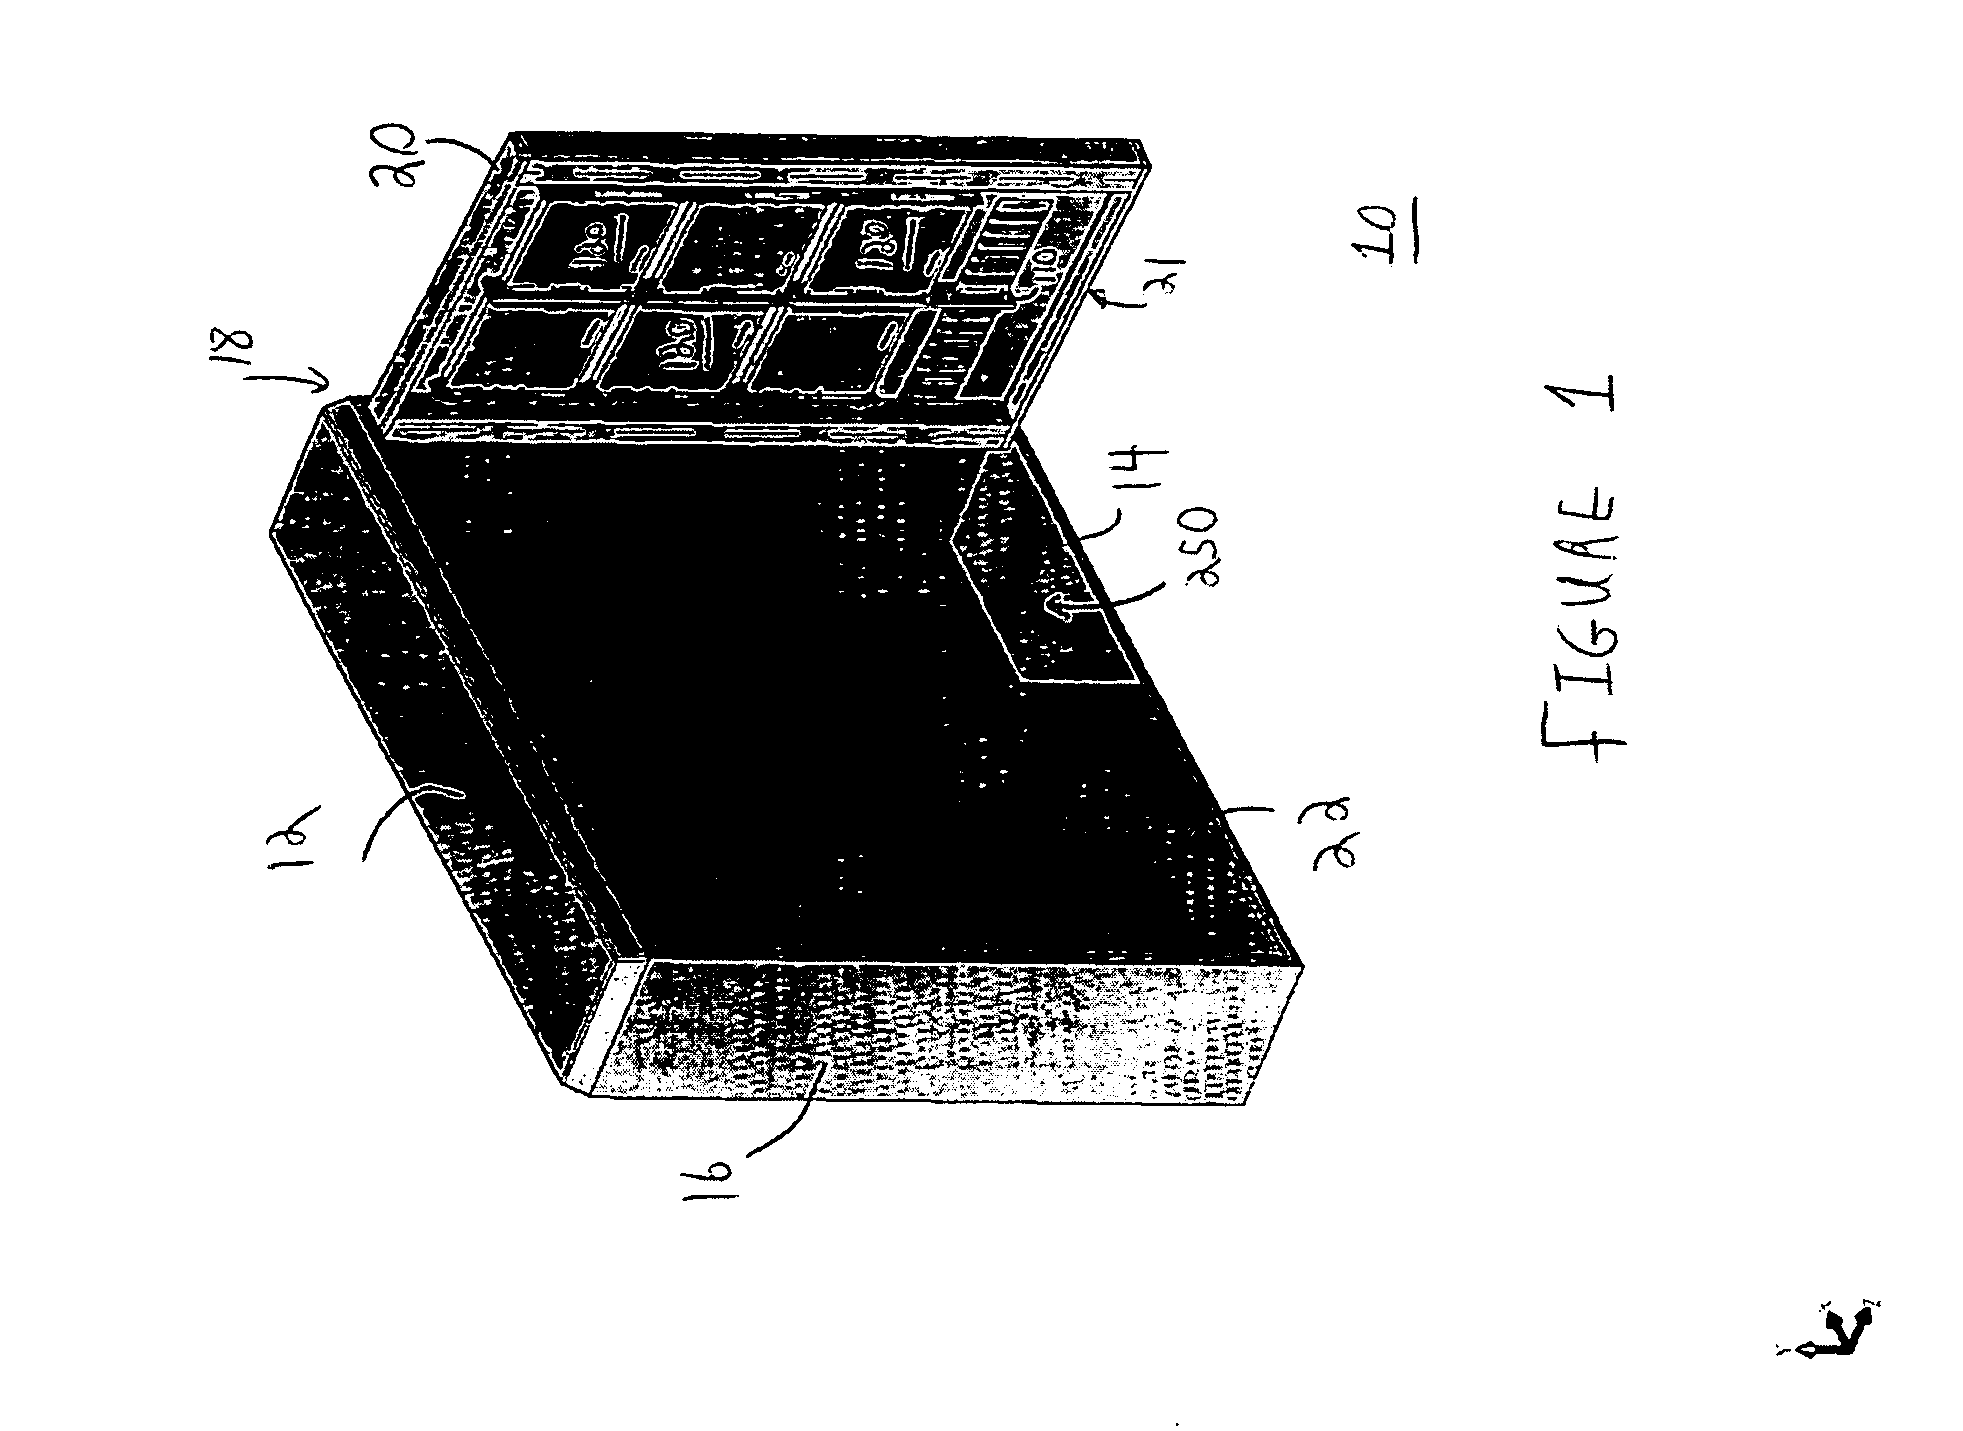 Inner door space communication assembly and a method for exchanging signals